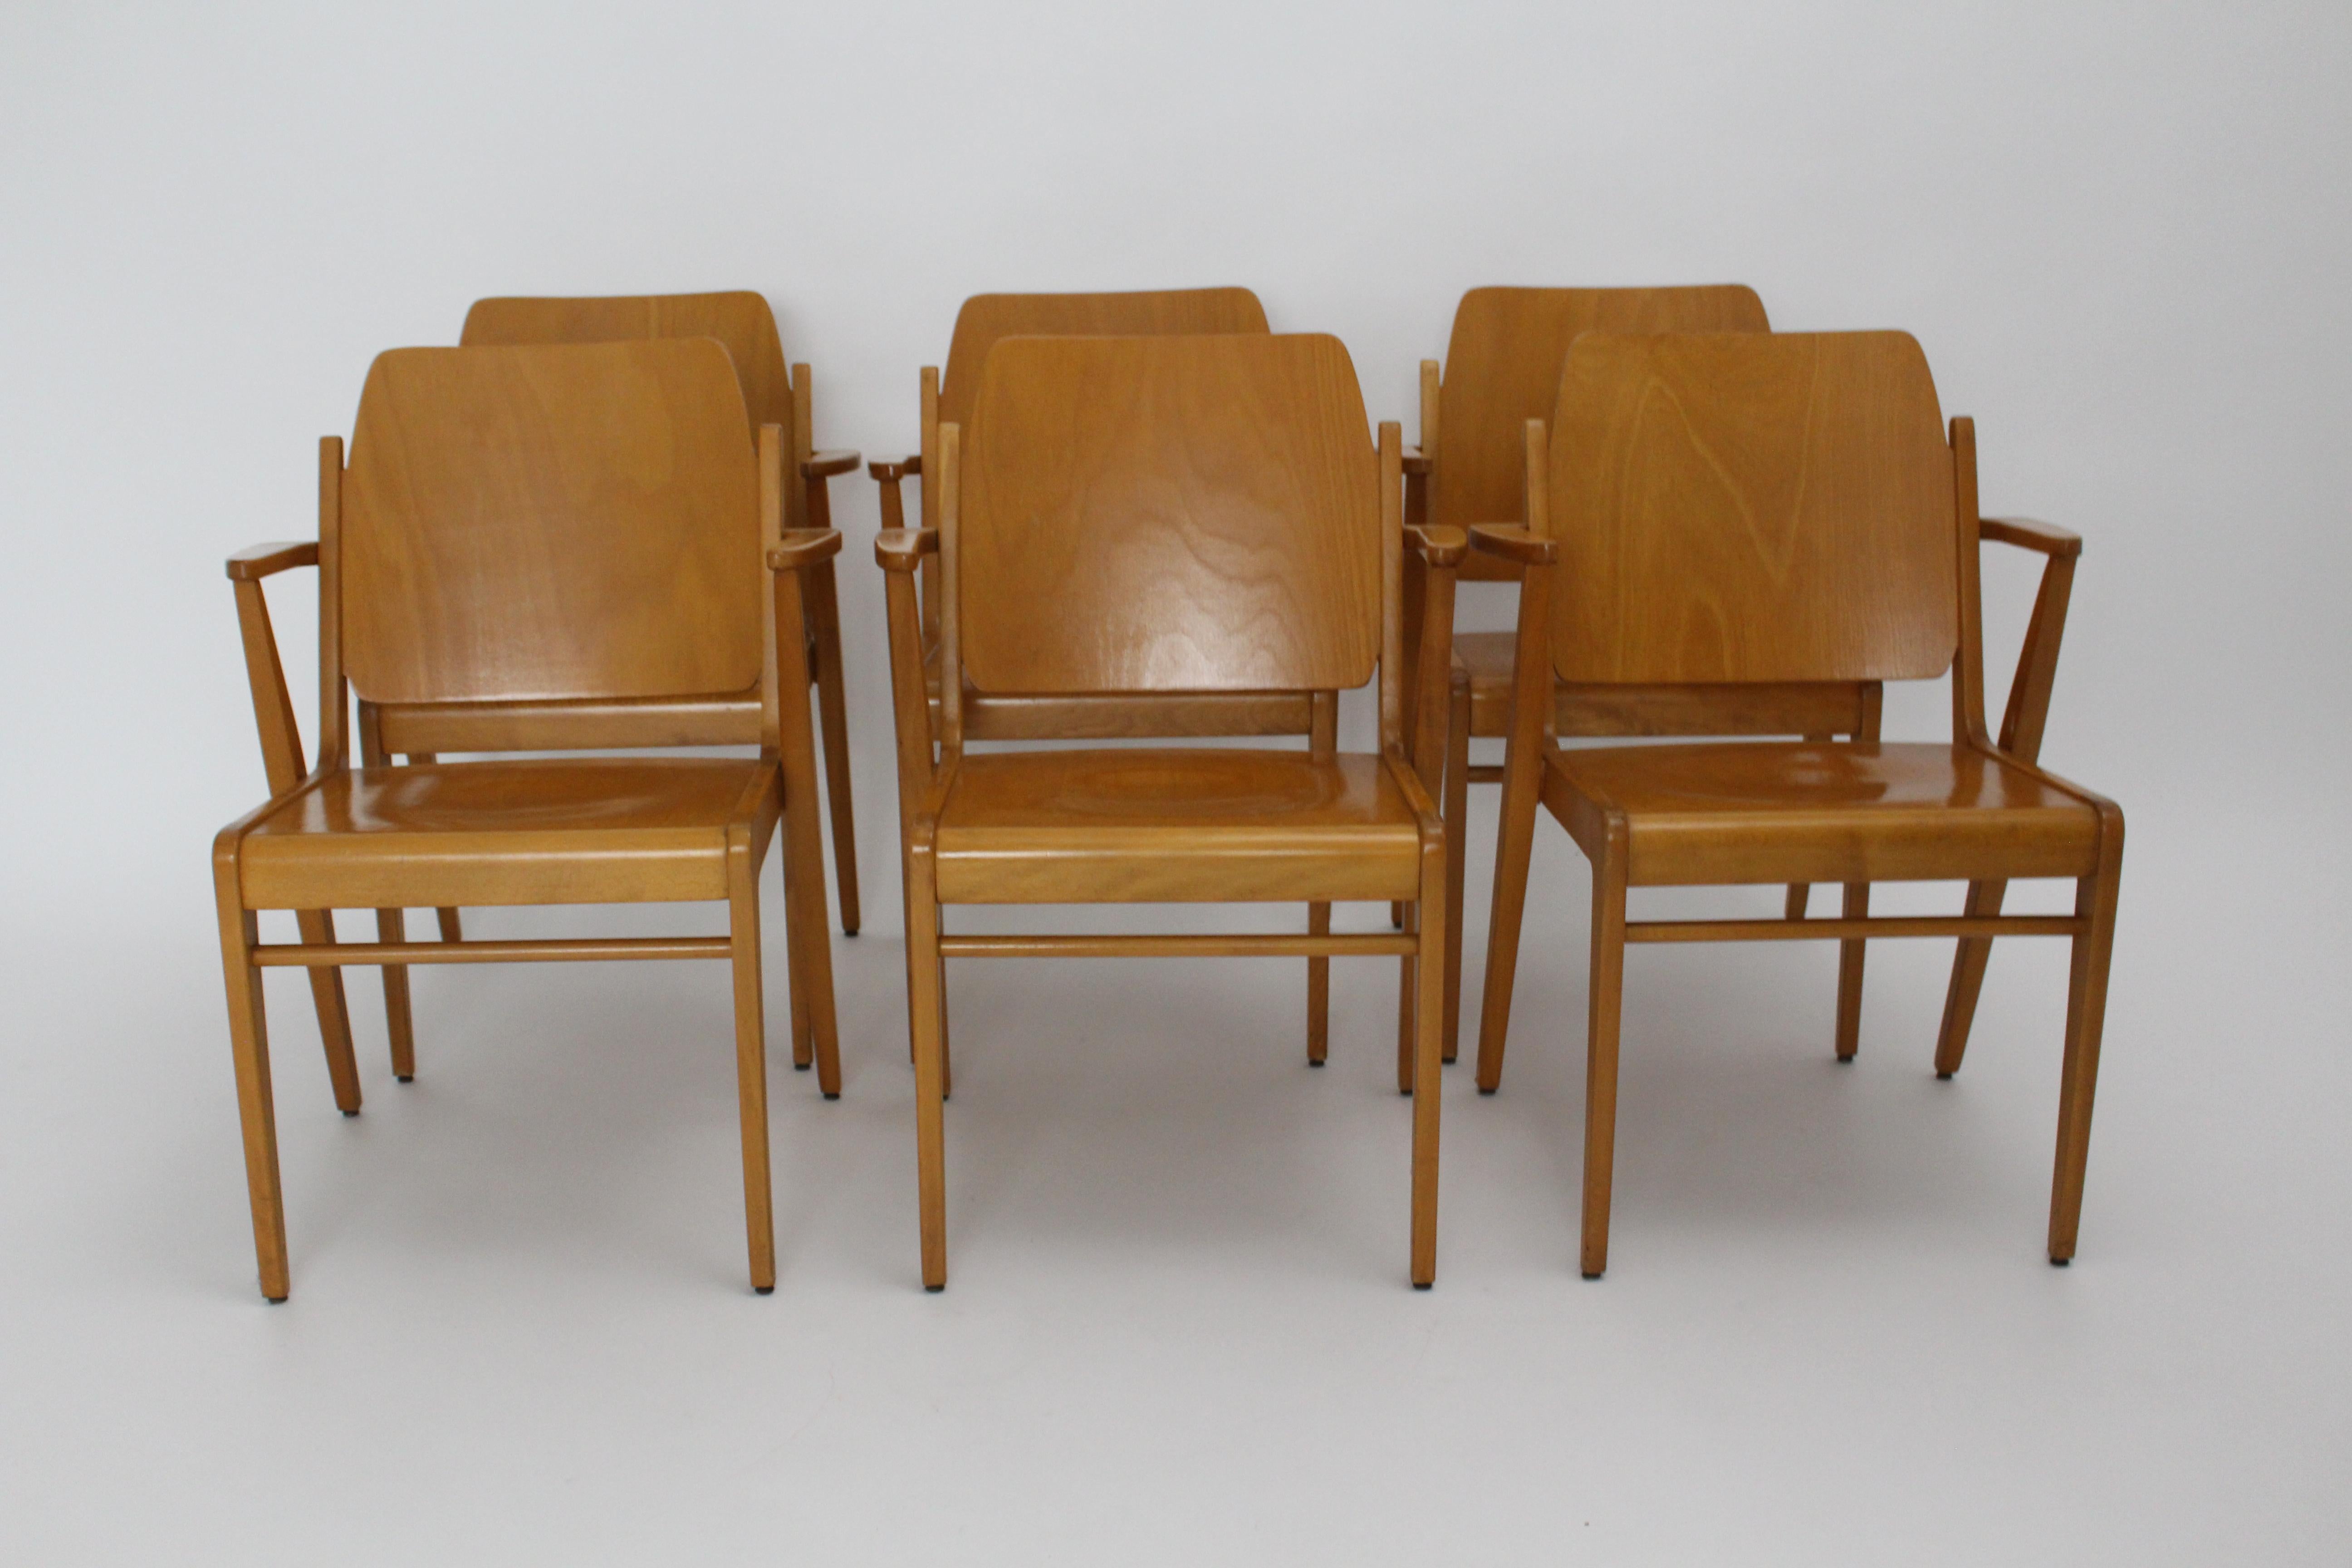 20th Century Beechwood Dining Room Chairs Austro by Franz Schuster Vienna 1959 Set of Six For Sale